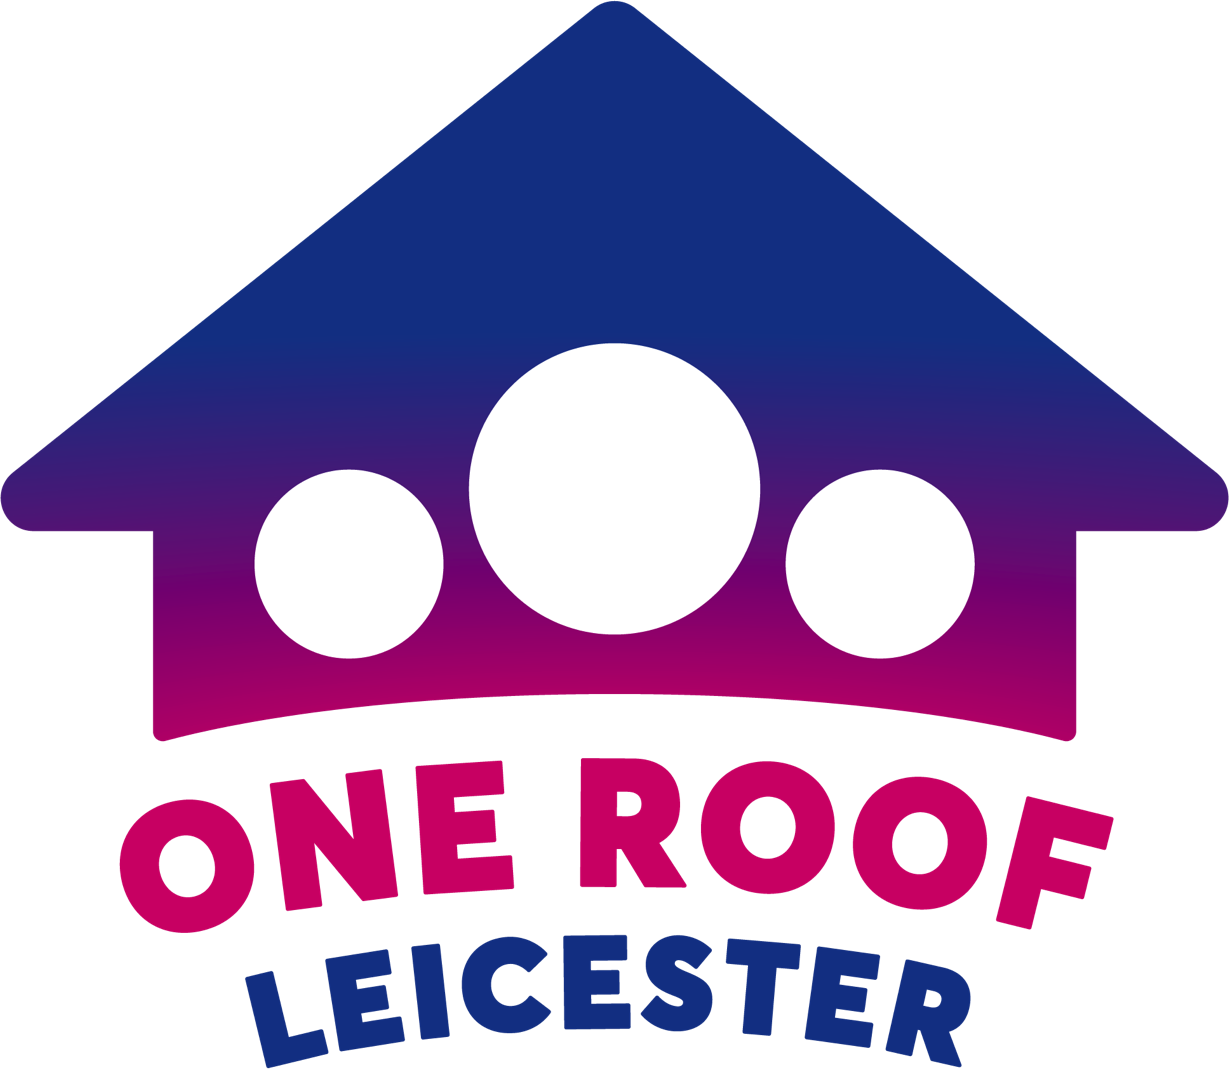 One Roof Leicester